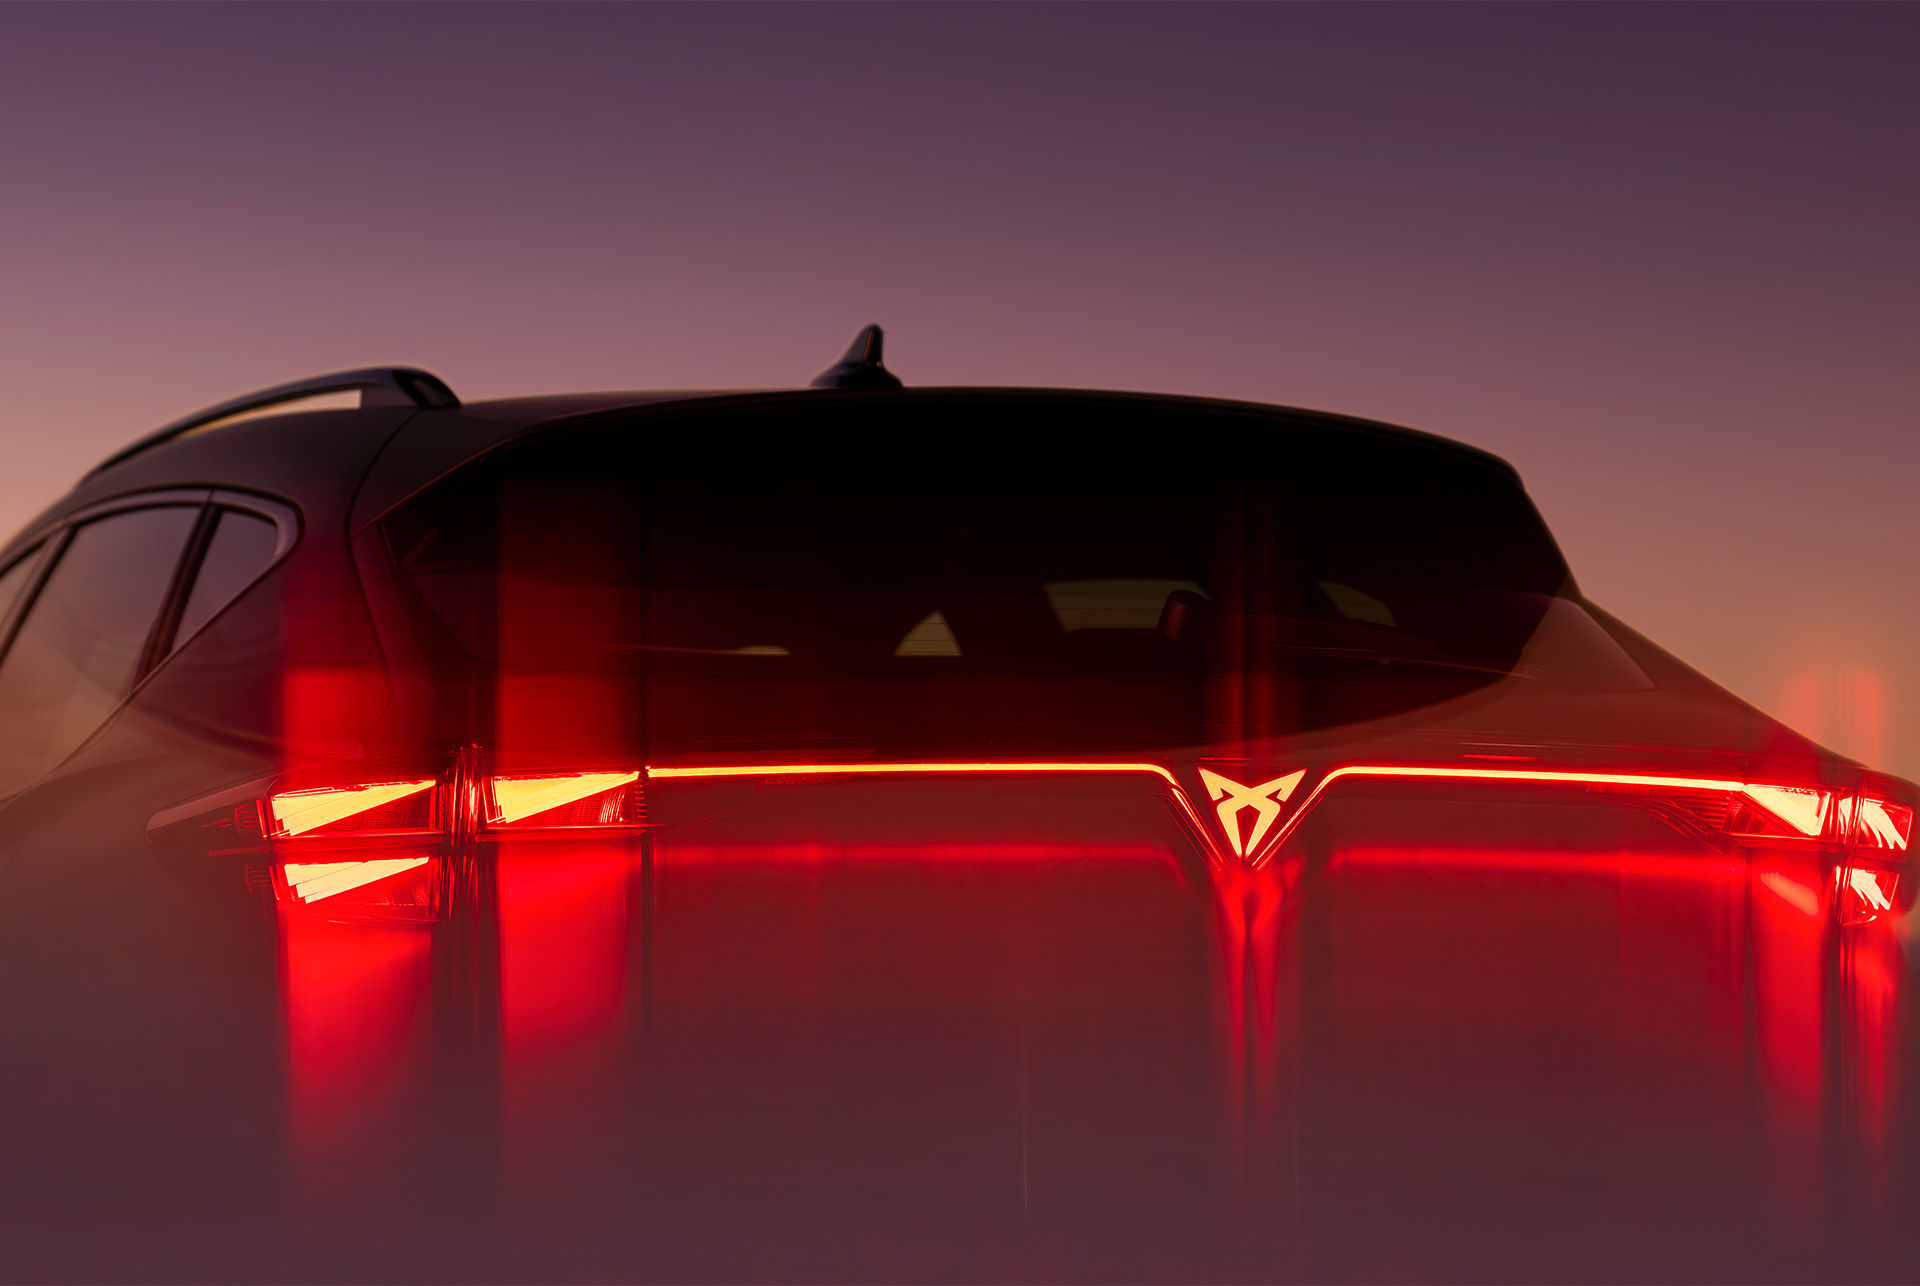 close up of the new cupra formentor's 2024 illuminated rear light showcasing angular design and a red glow against the sunset backround.